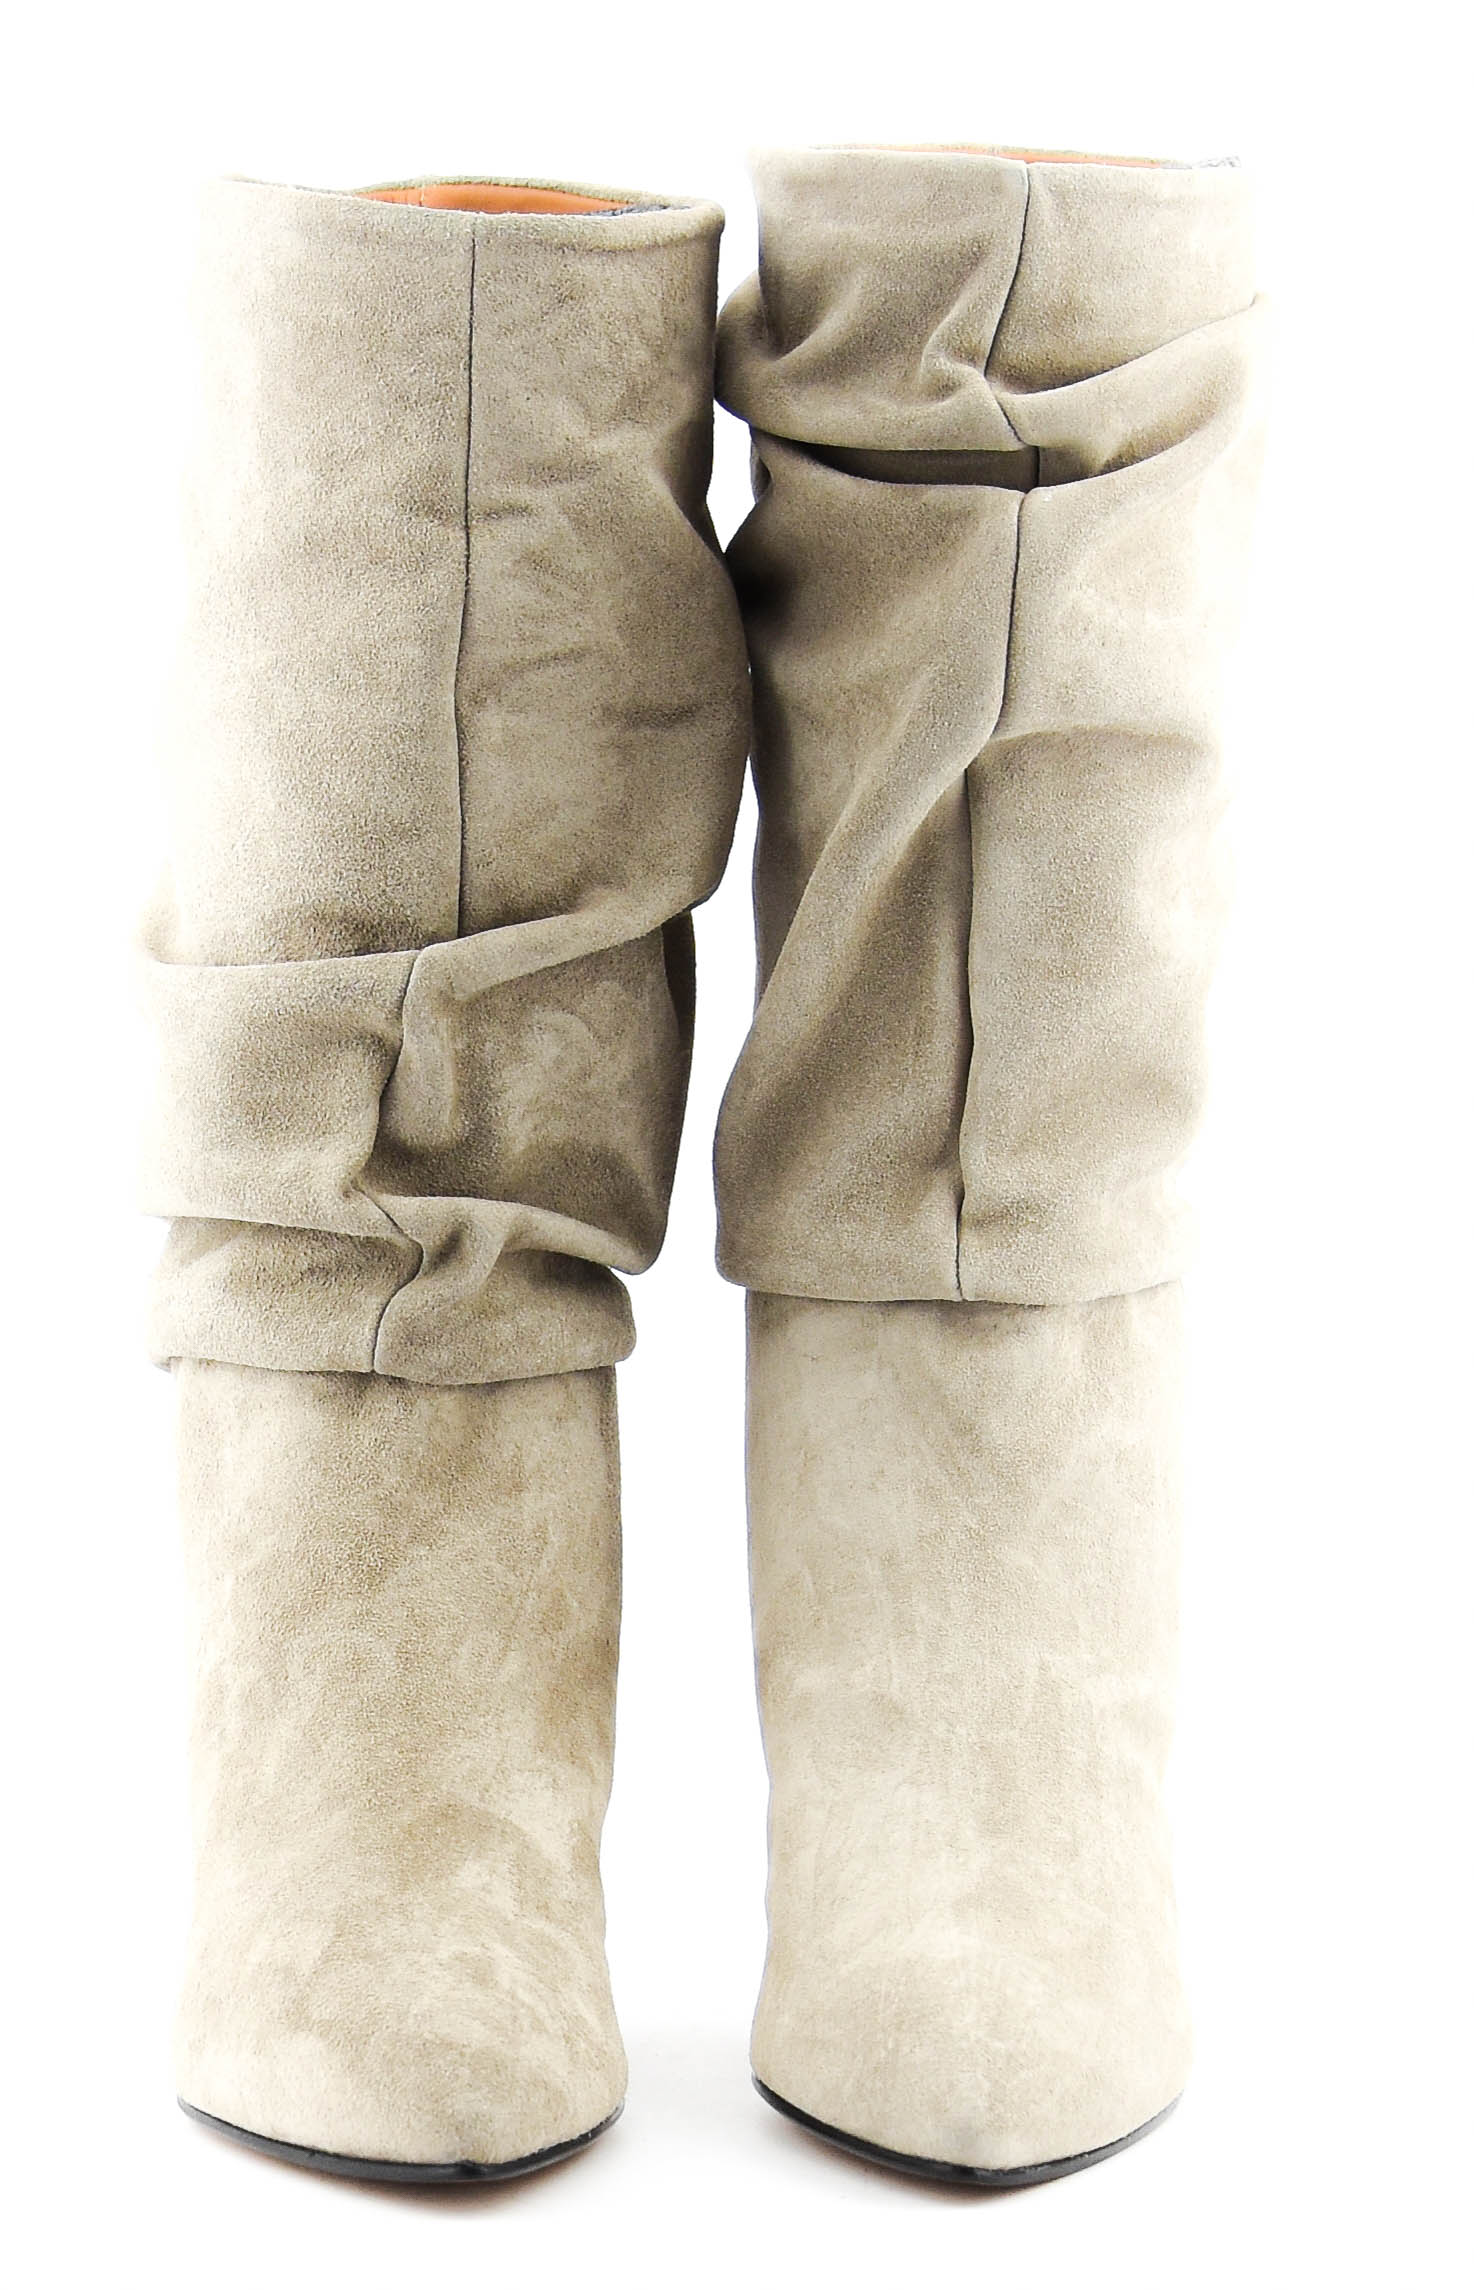 TORAL PULL UP BOOT SAND TAUPE